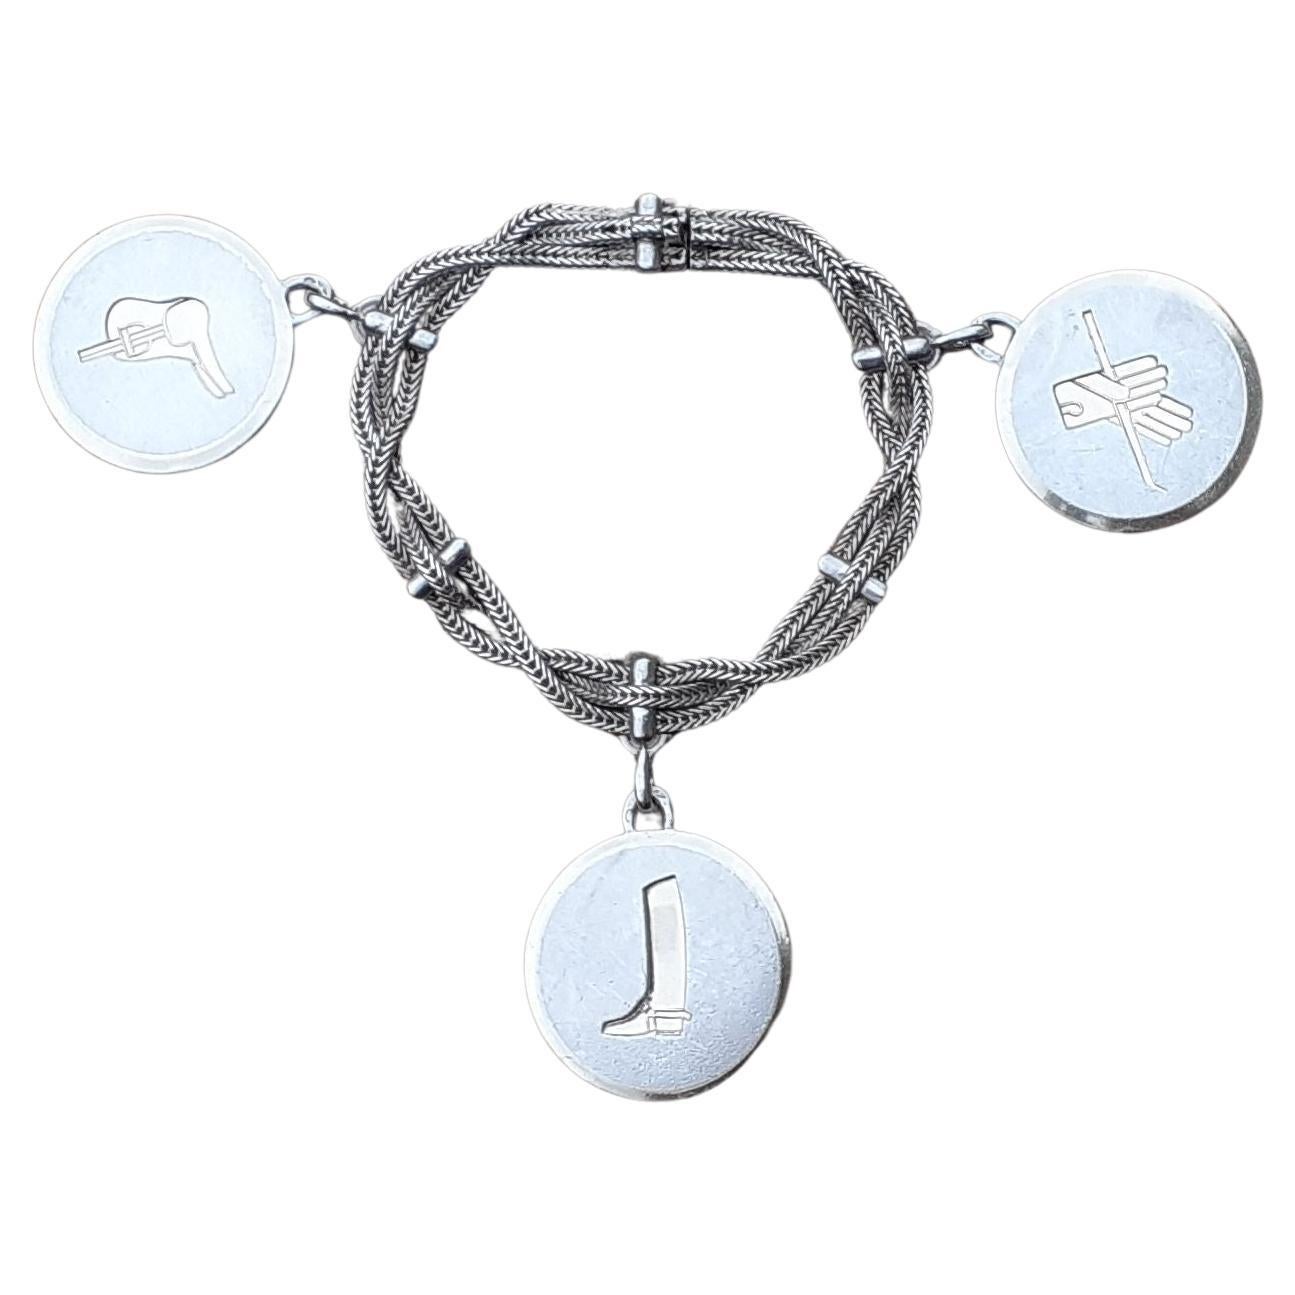 Exceptional Hermès Bracelet with Equestrian Theme Charms Horse Texas in Silver